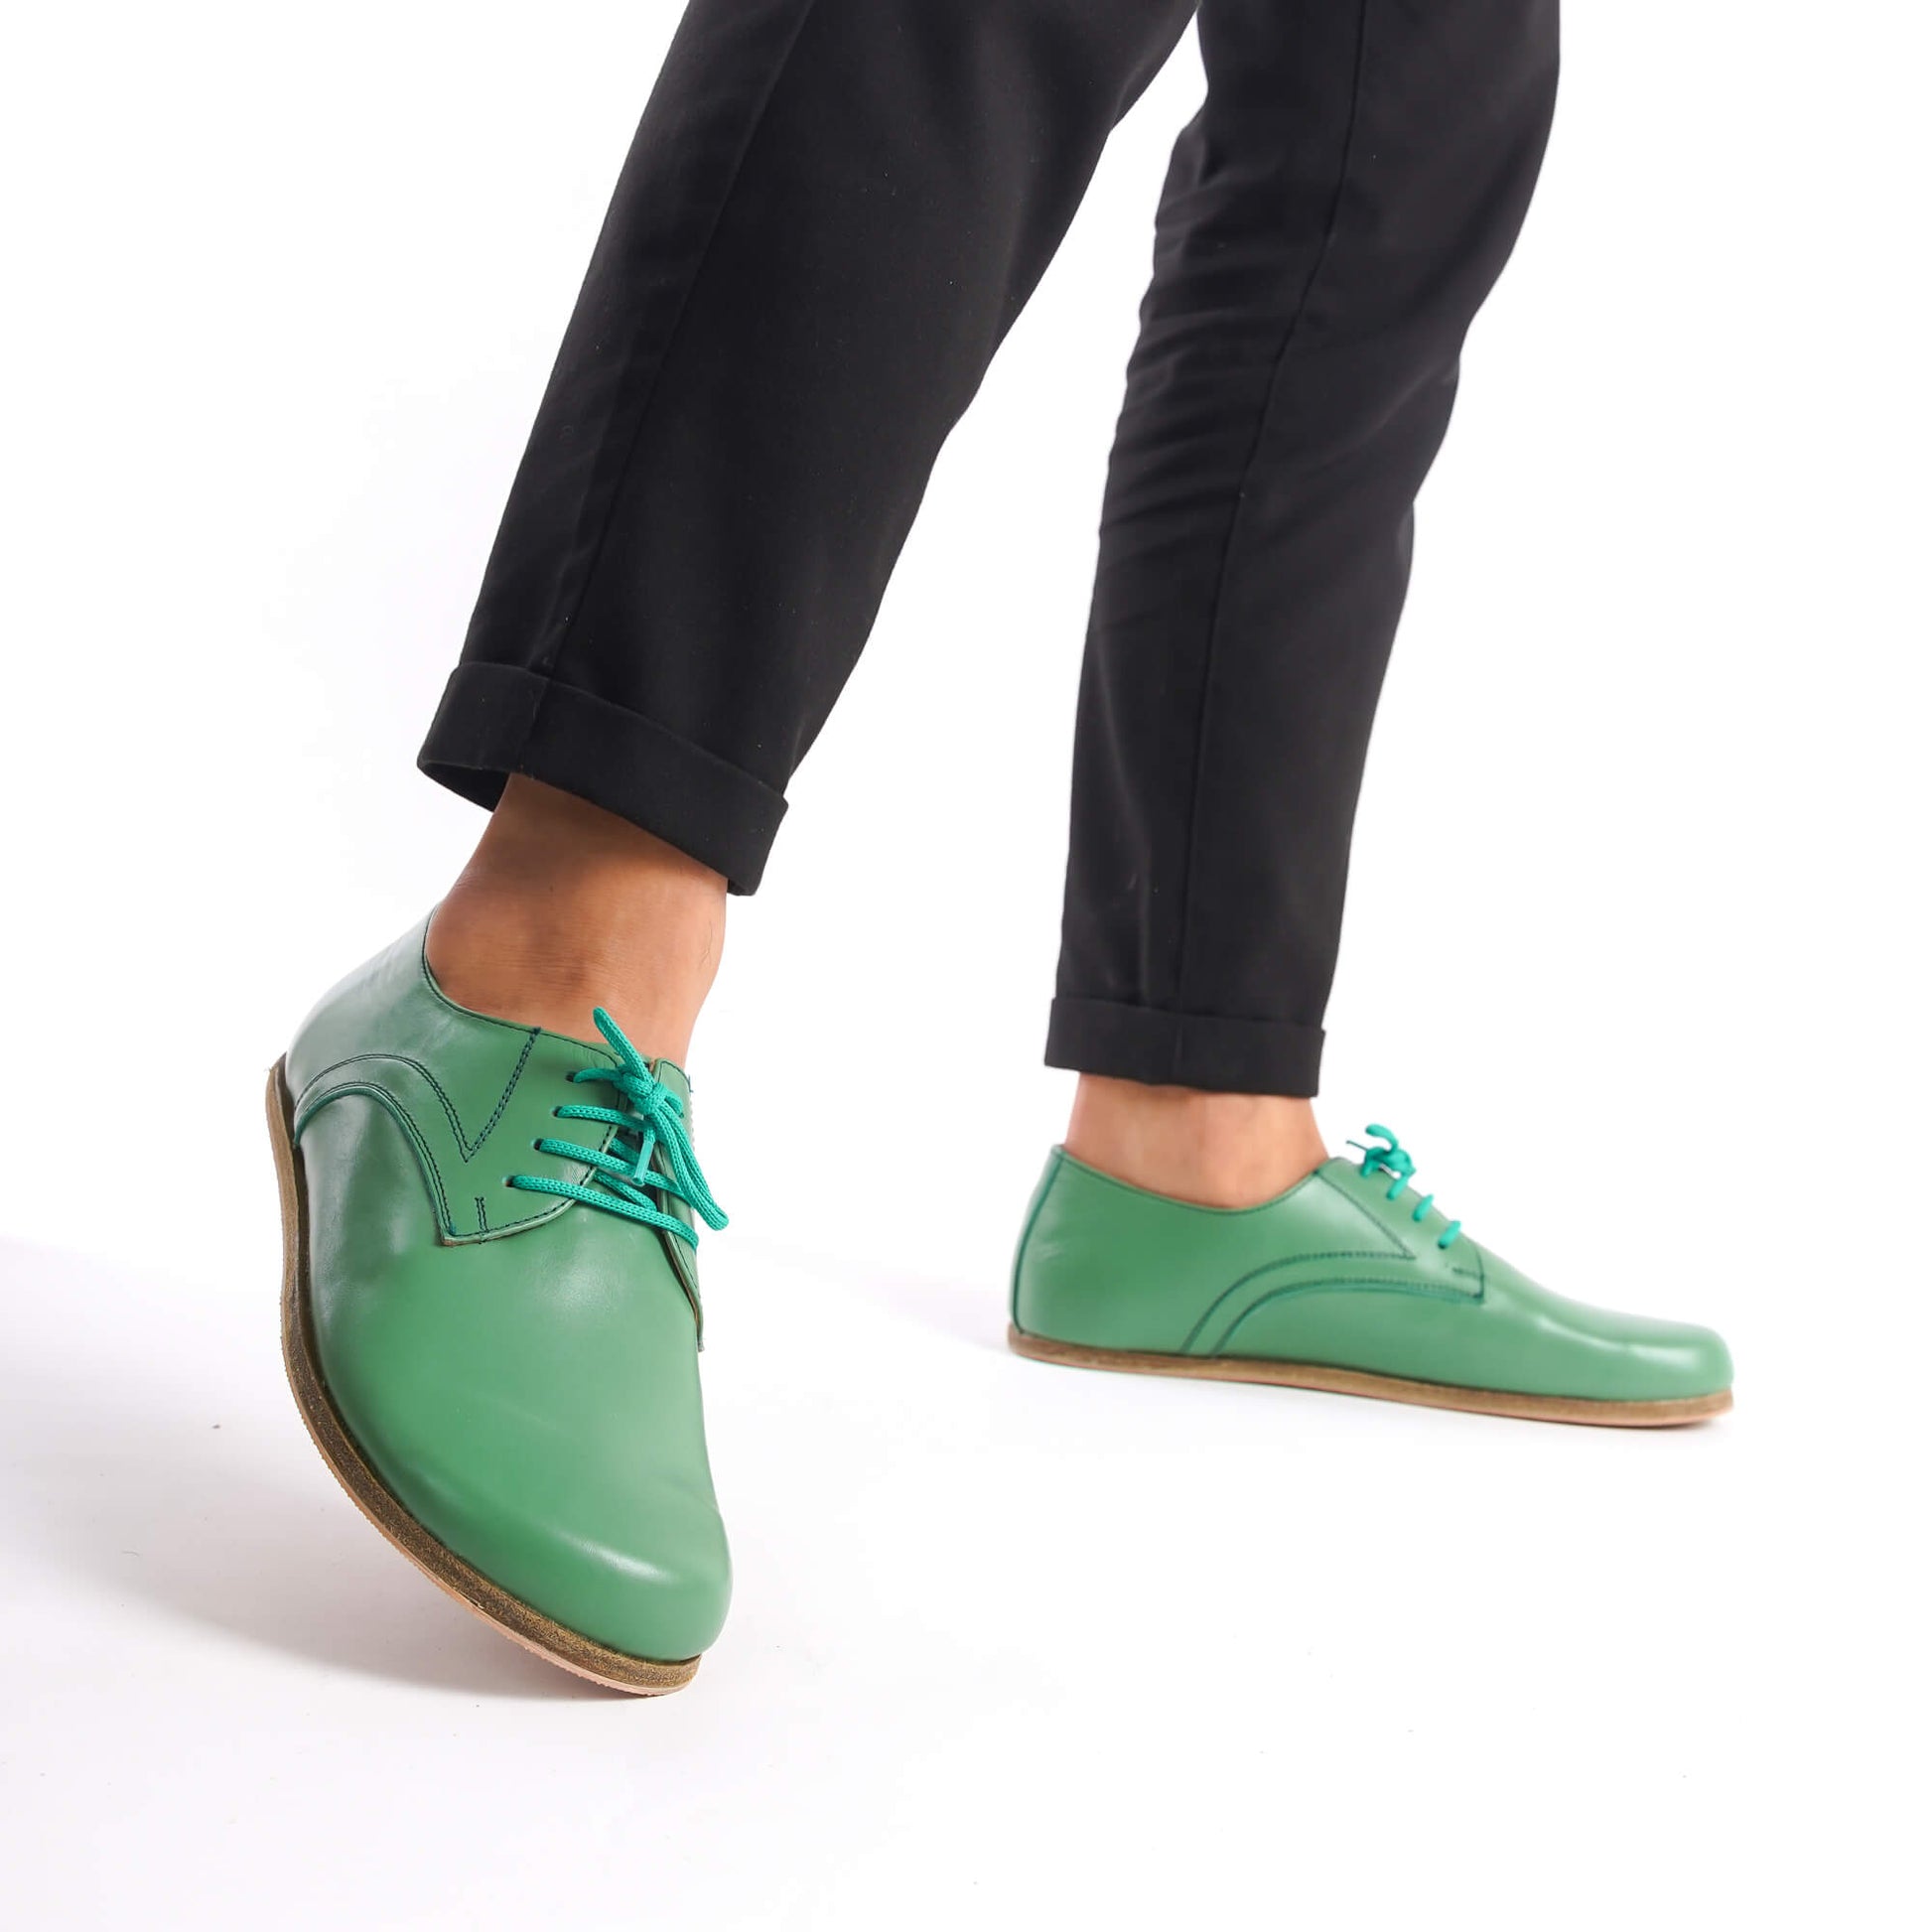 Walking shot of Locris Leather Barefoot Men's Oxfords in green, highlighting their natural fit and foot health benefits.